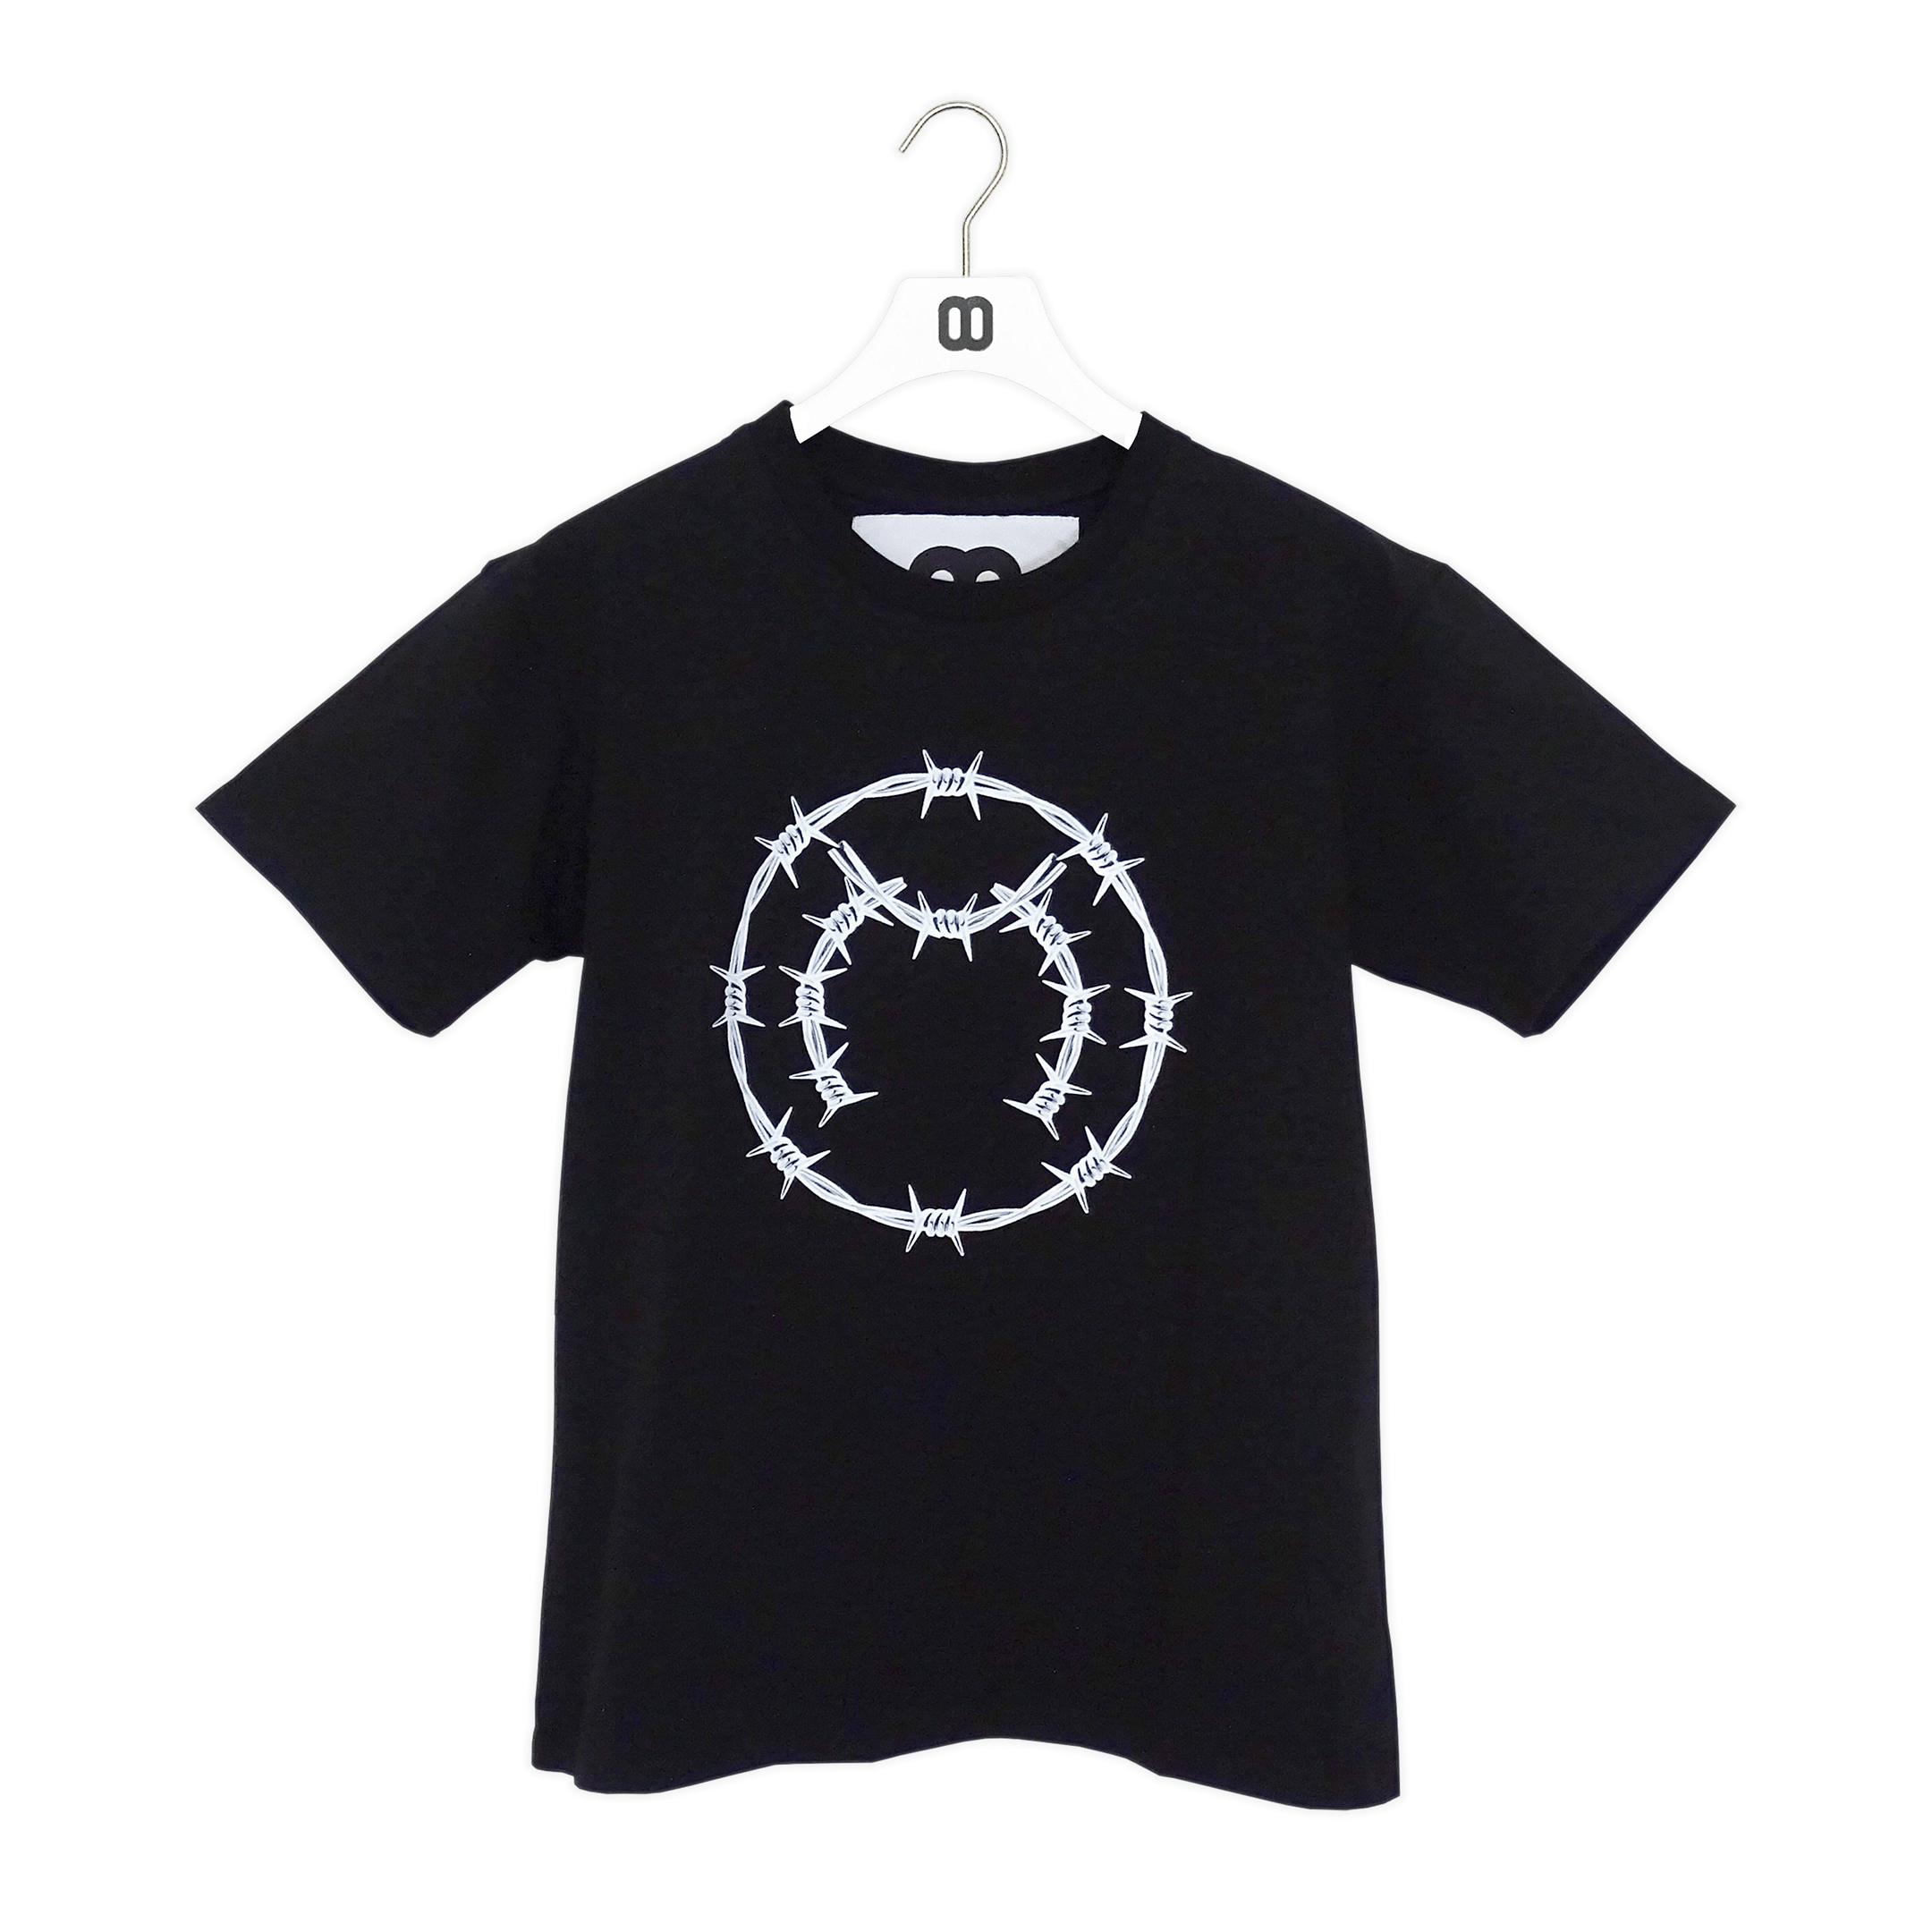 Closed Resistance Shirt